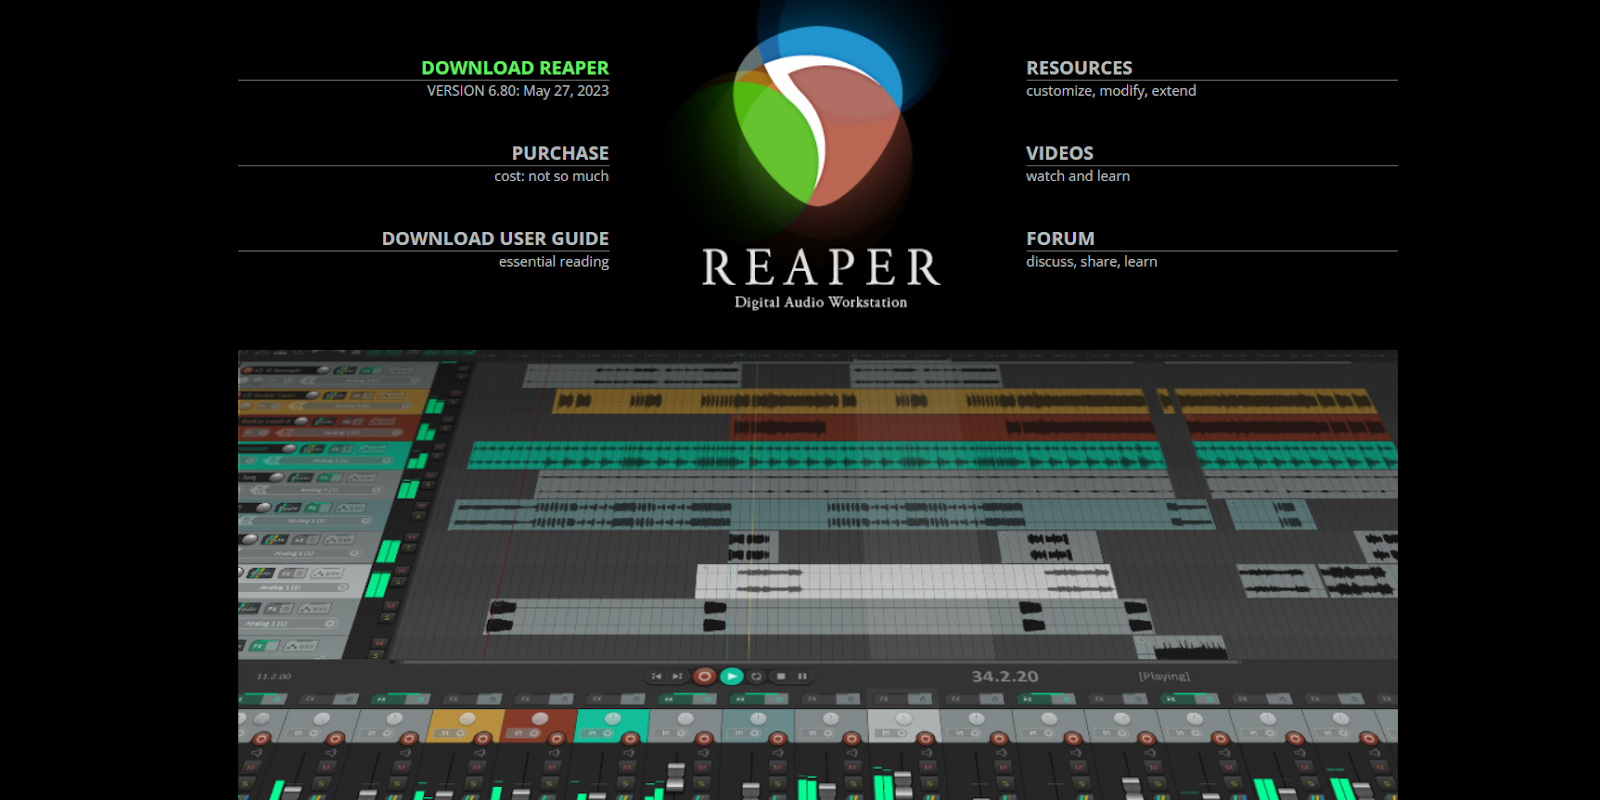 Reaper Home Page view